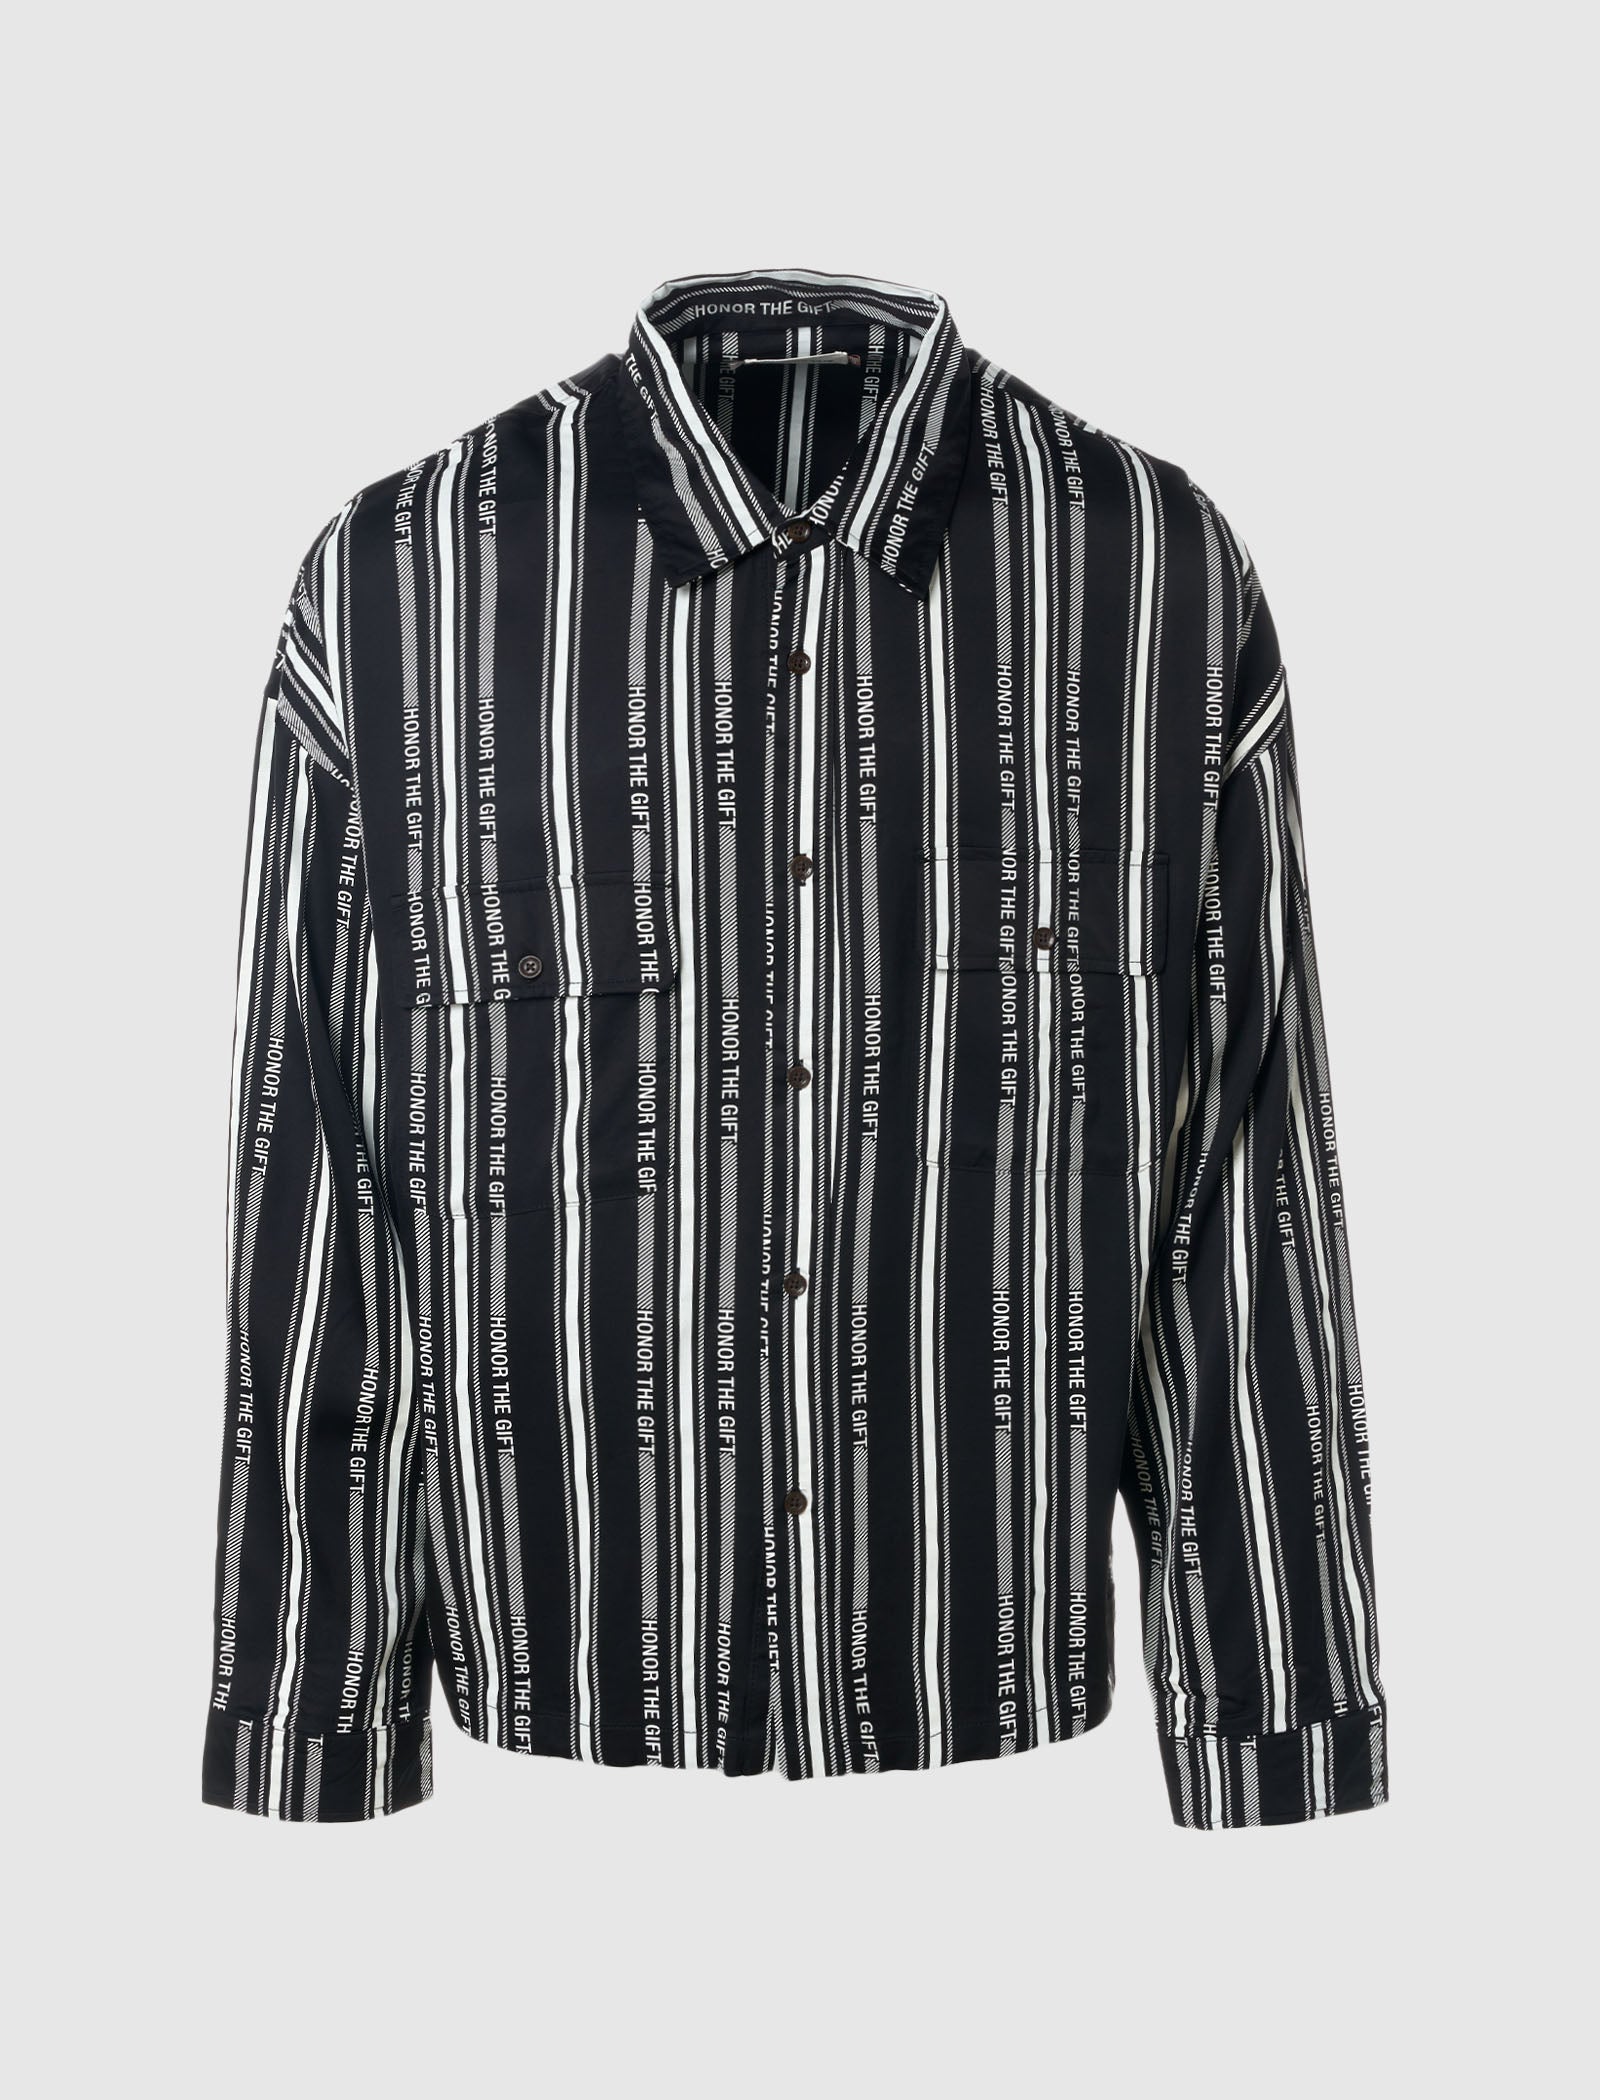 HONOR THE GIFT STRIPE BUTTON-UP SHIRT